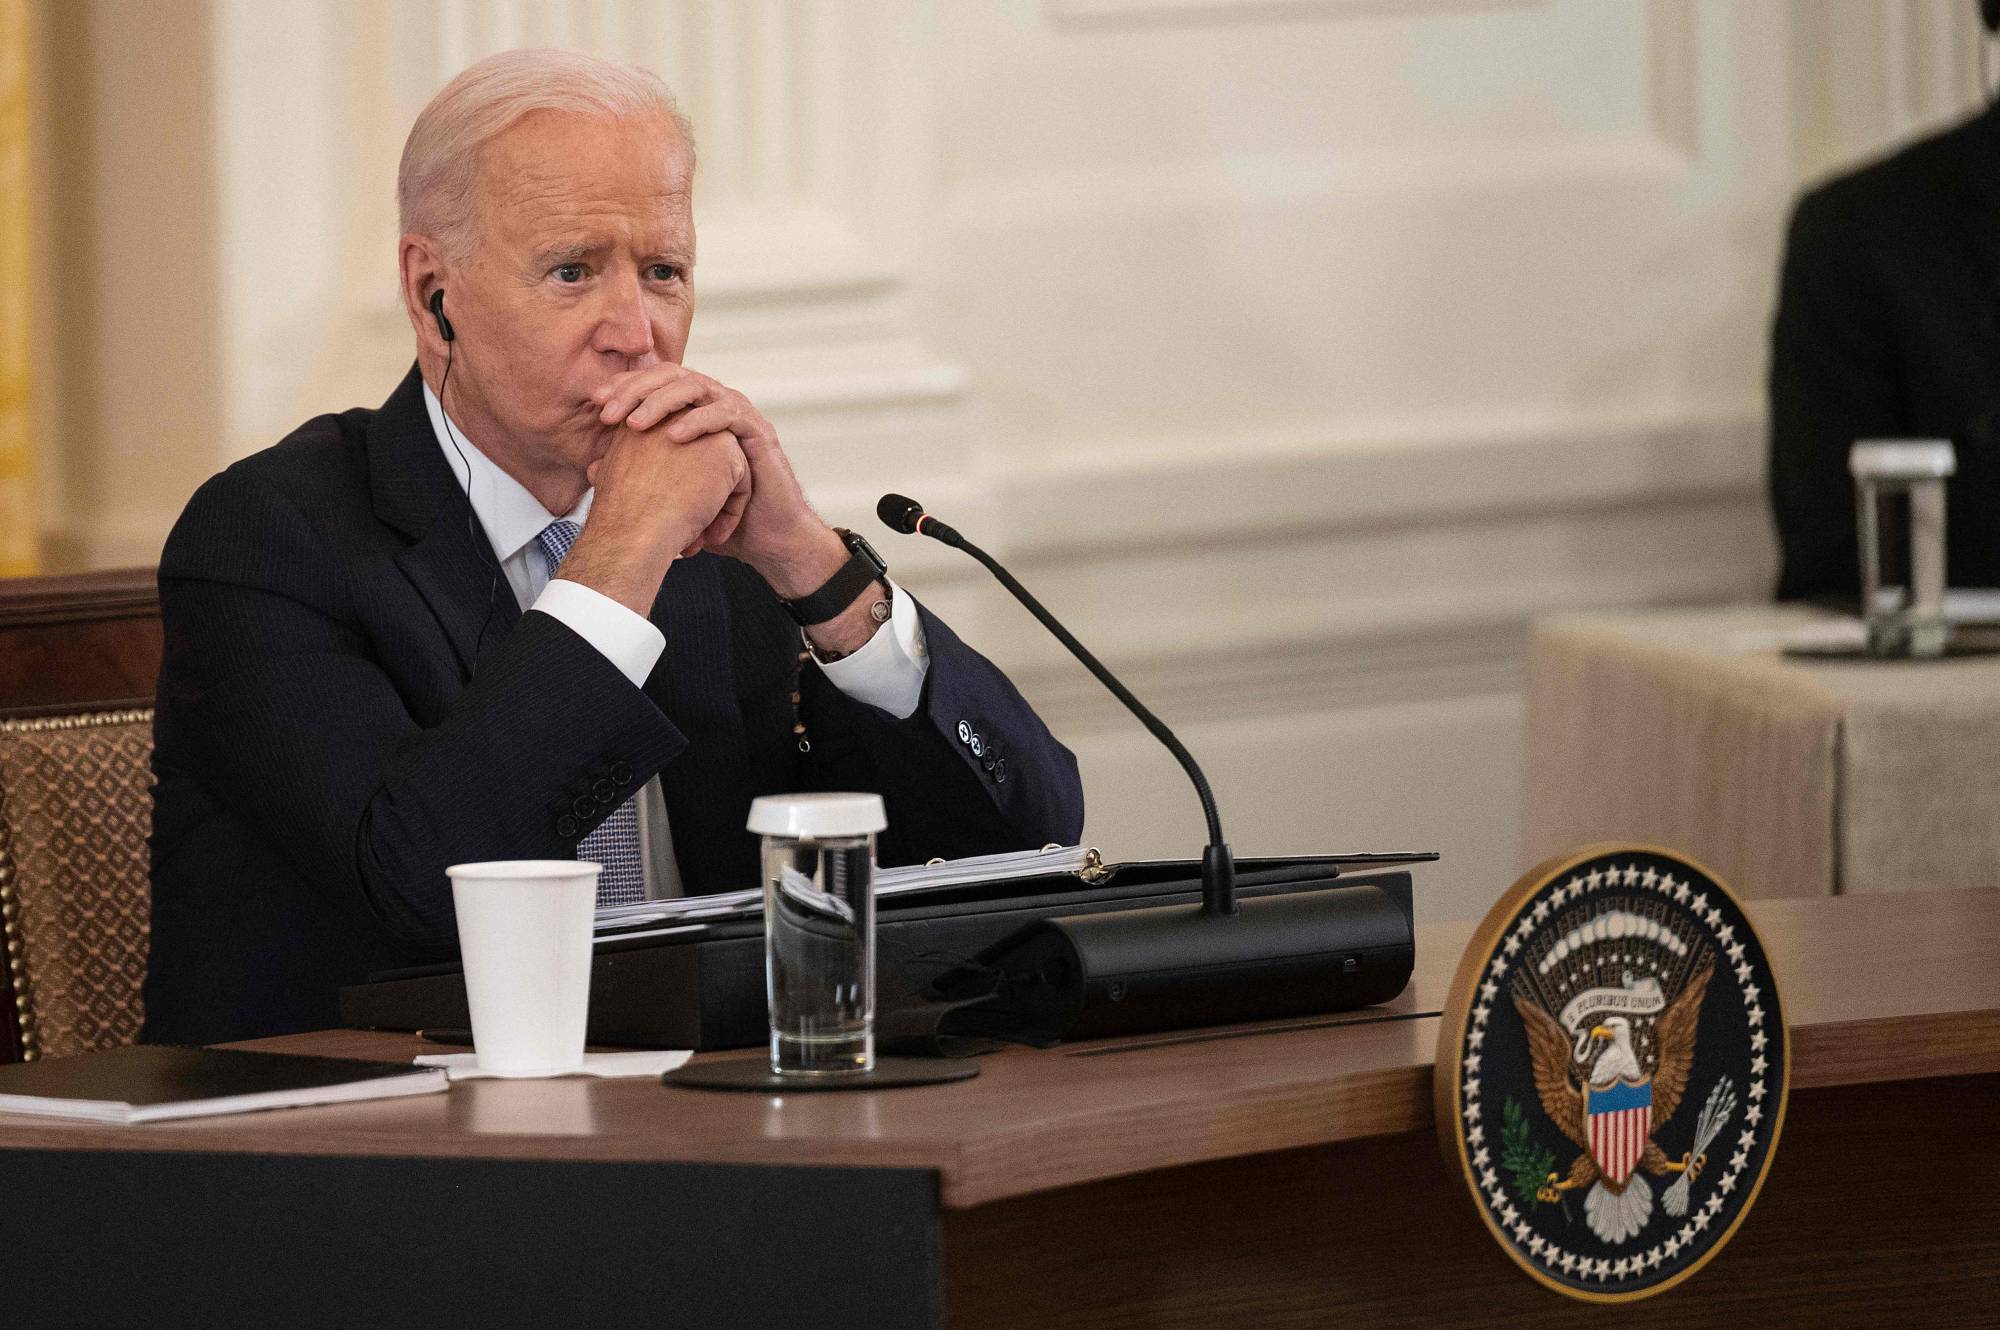 U.S. President Joe Biden listens as Indian leader Narendra Modi speaks with Prime Minister Suga Yoshihide and Australian leader Scott Morrison during the first-ever in-person 'Quad' leaders summit at the White House in Washington on Friday. | AFP-JIJI